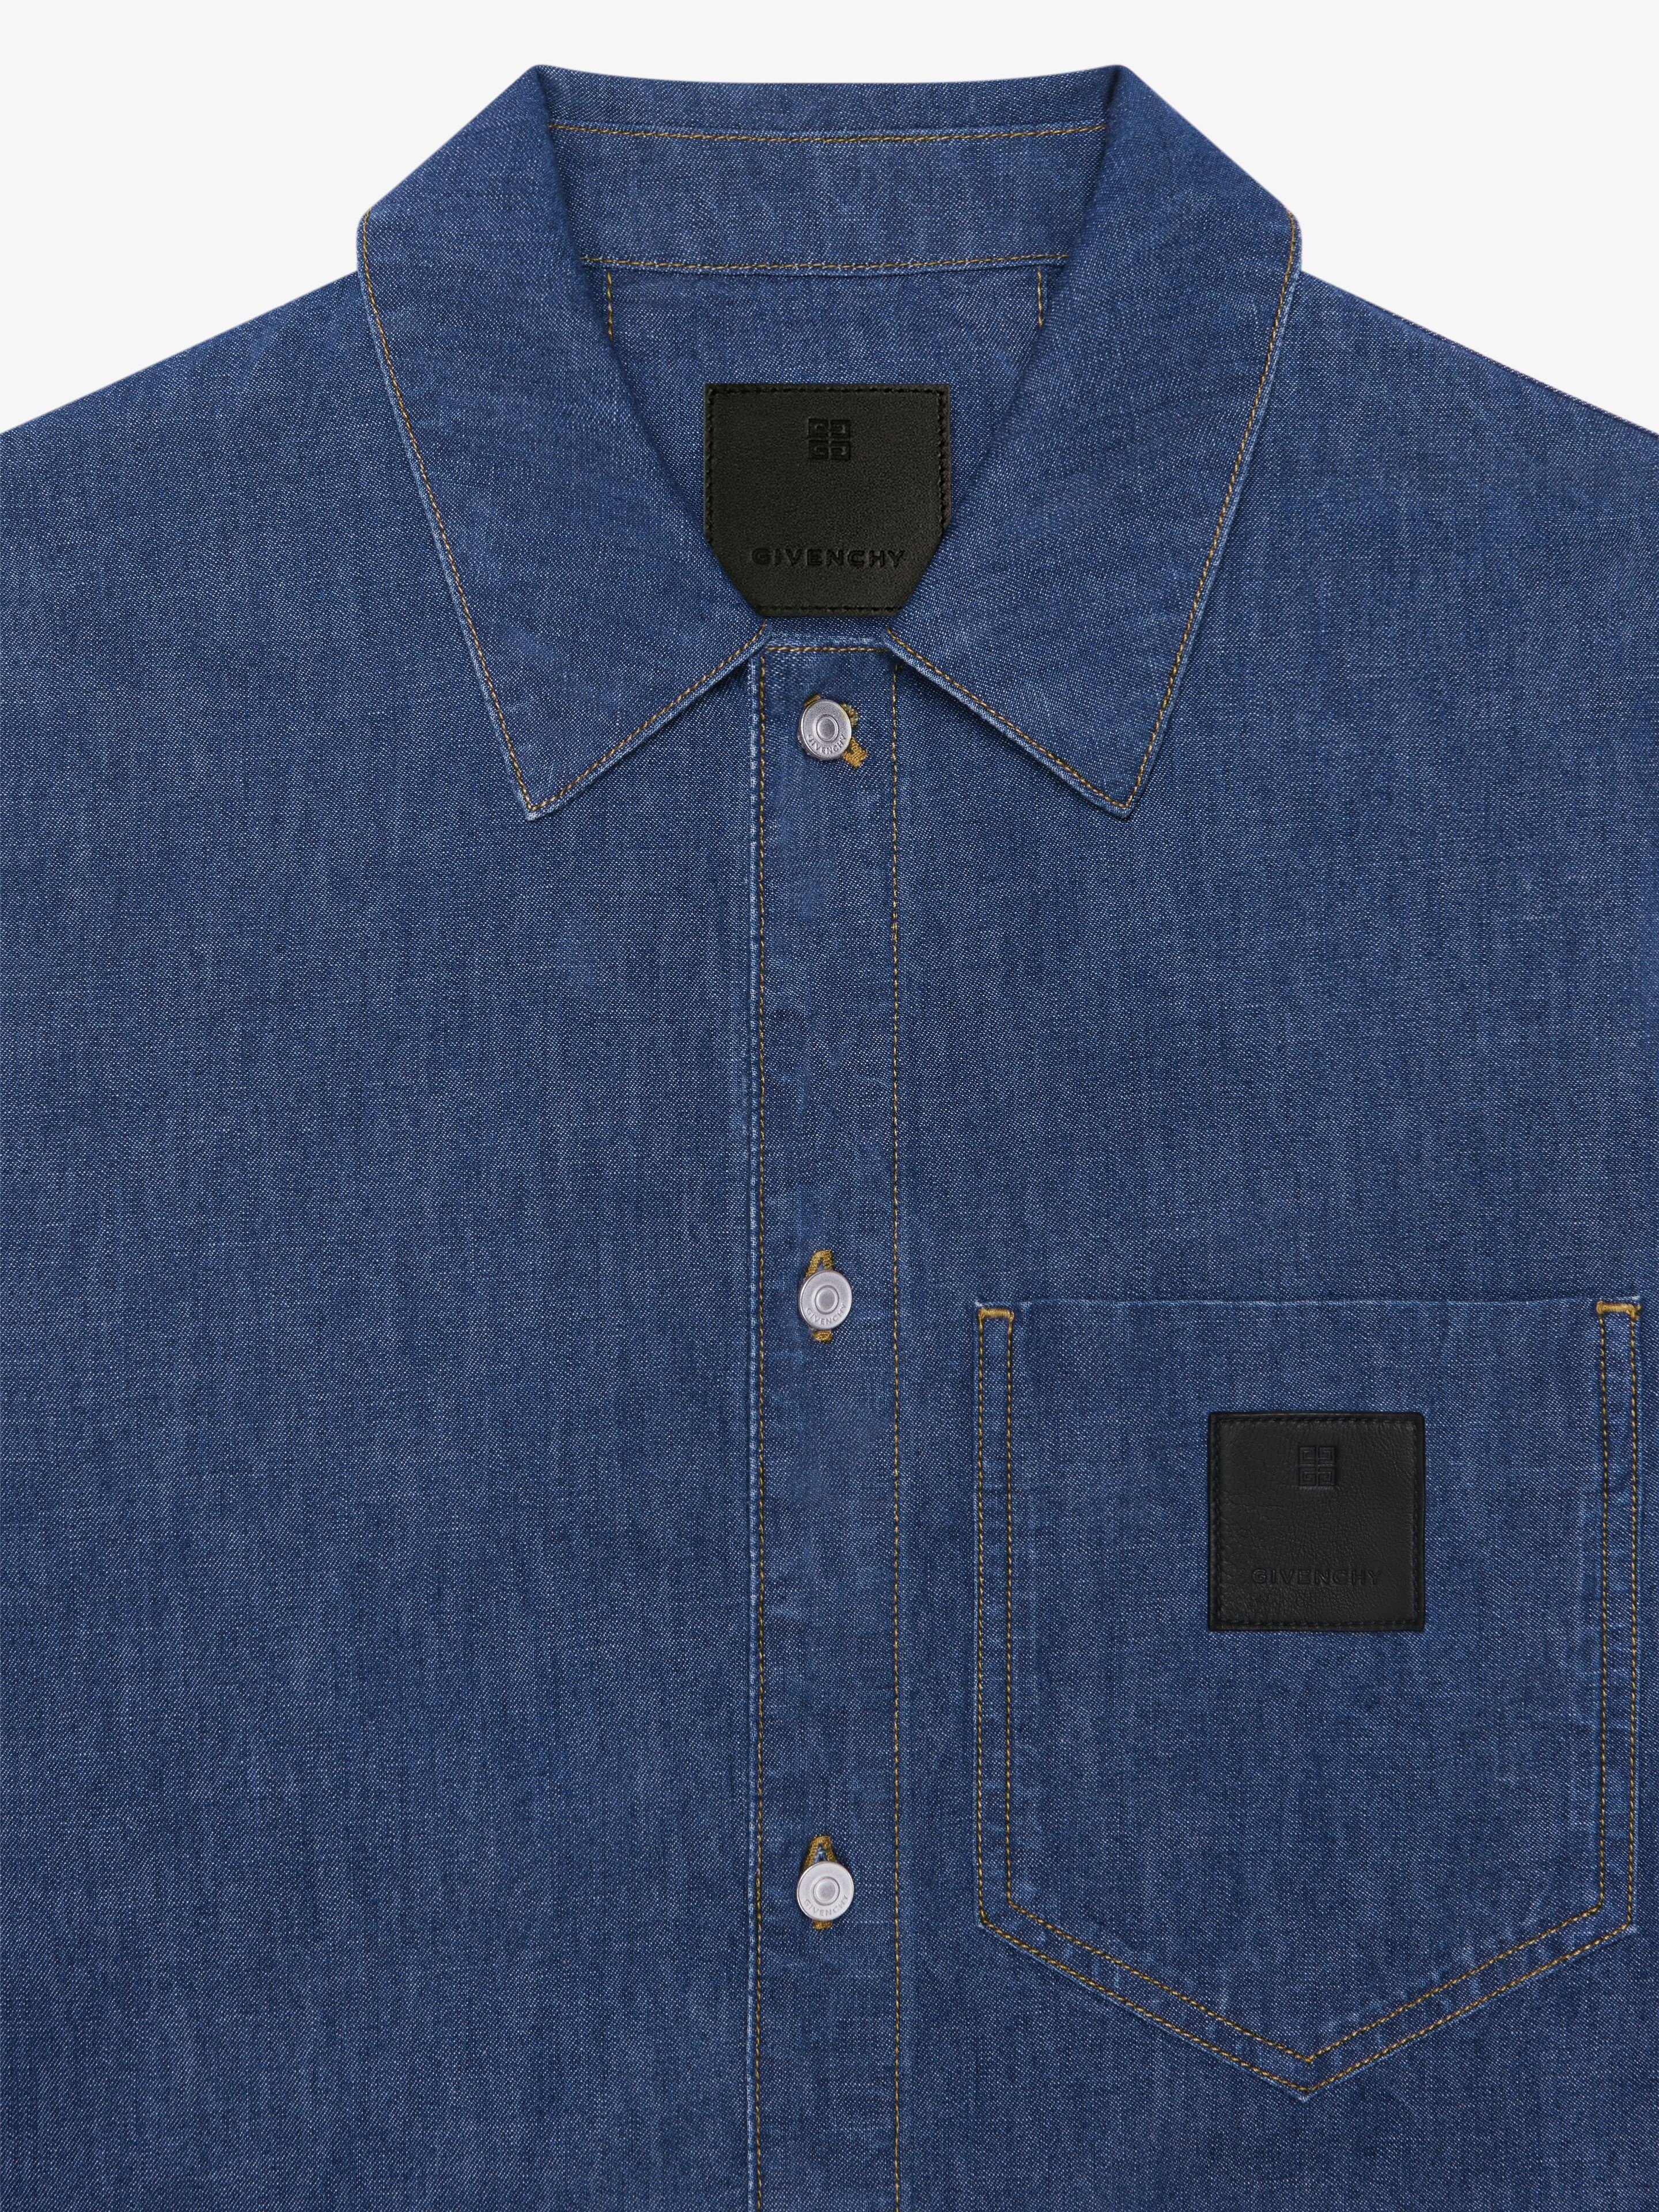 BOXY FIT SHIRT IN DENIM - 5